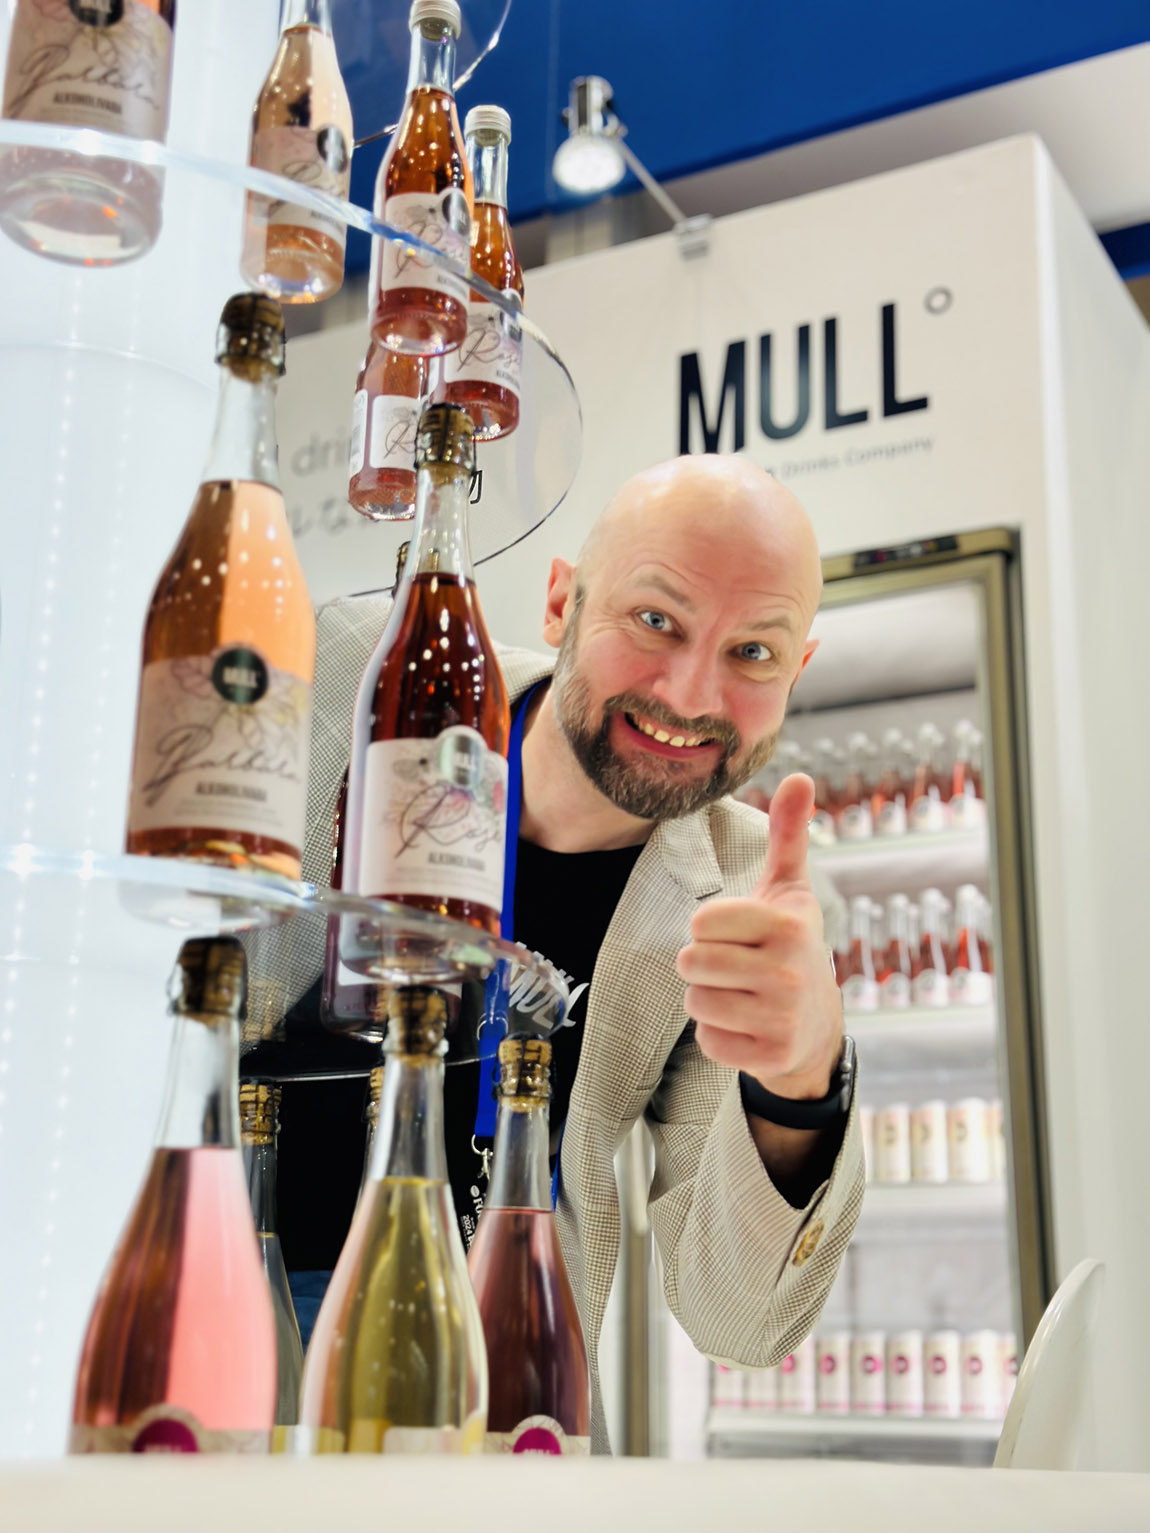 MULL° drinks: Drinks crafted with love in Northern Europe